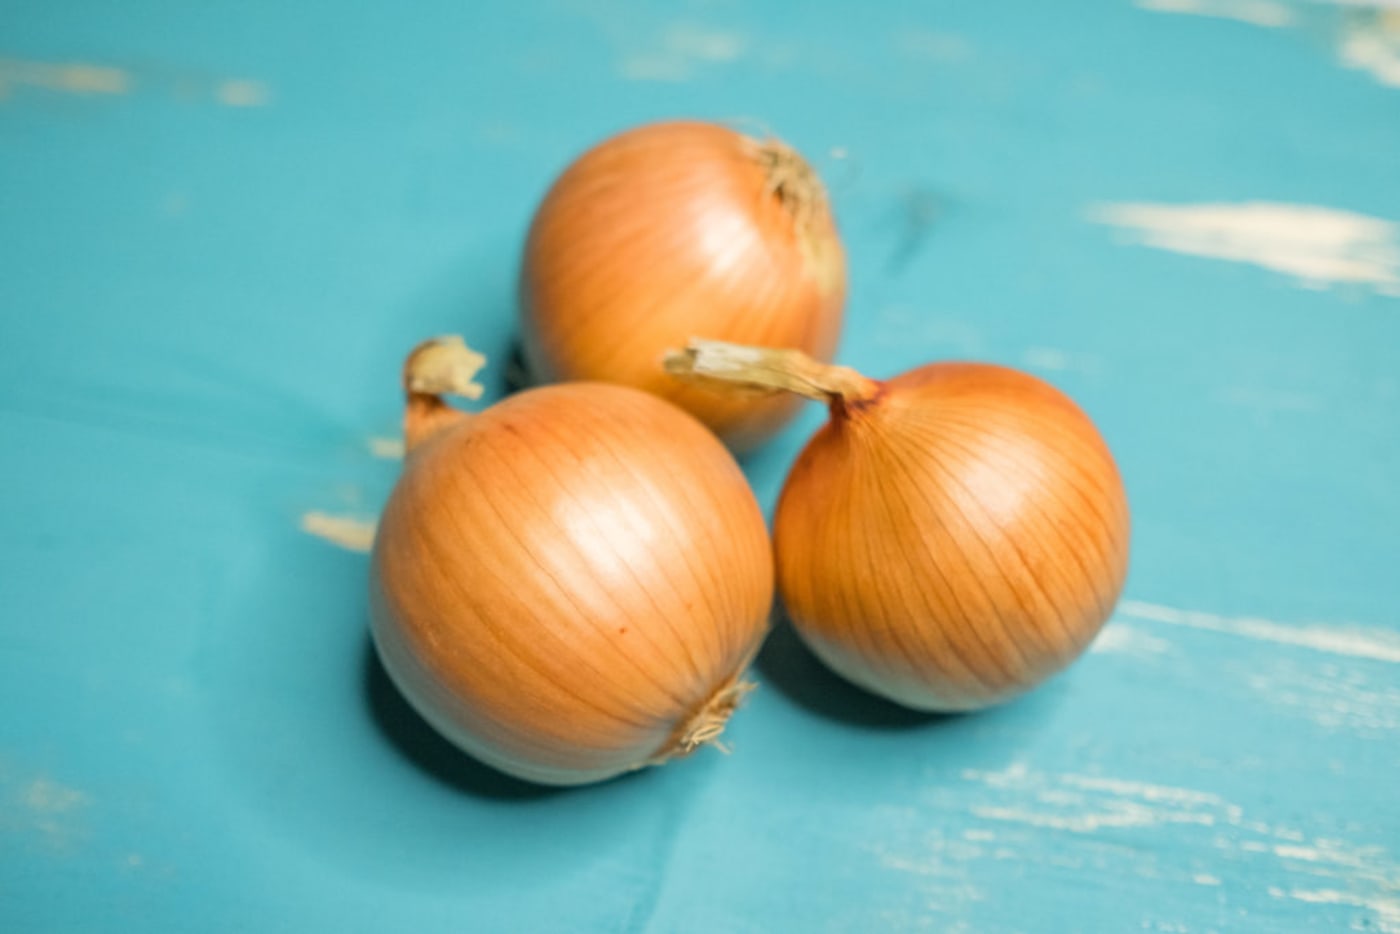 tearless onions to be sold in waitrose across the uk